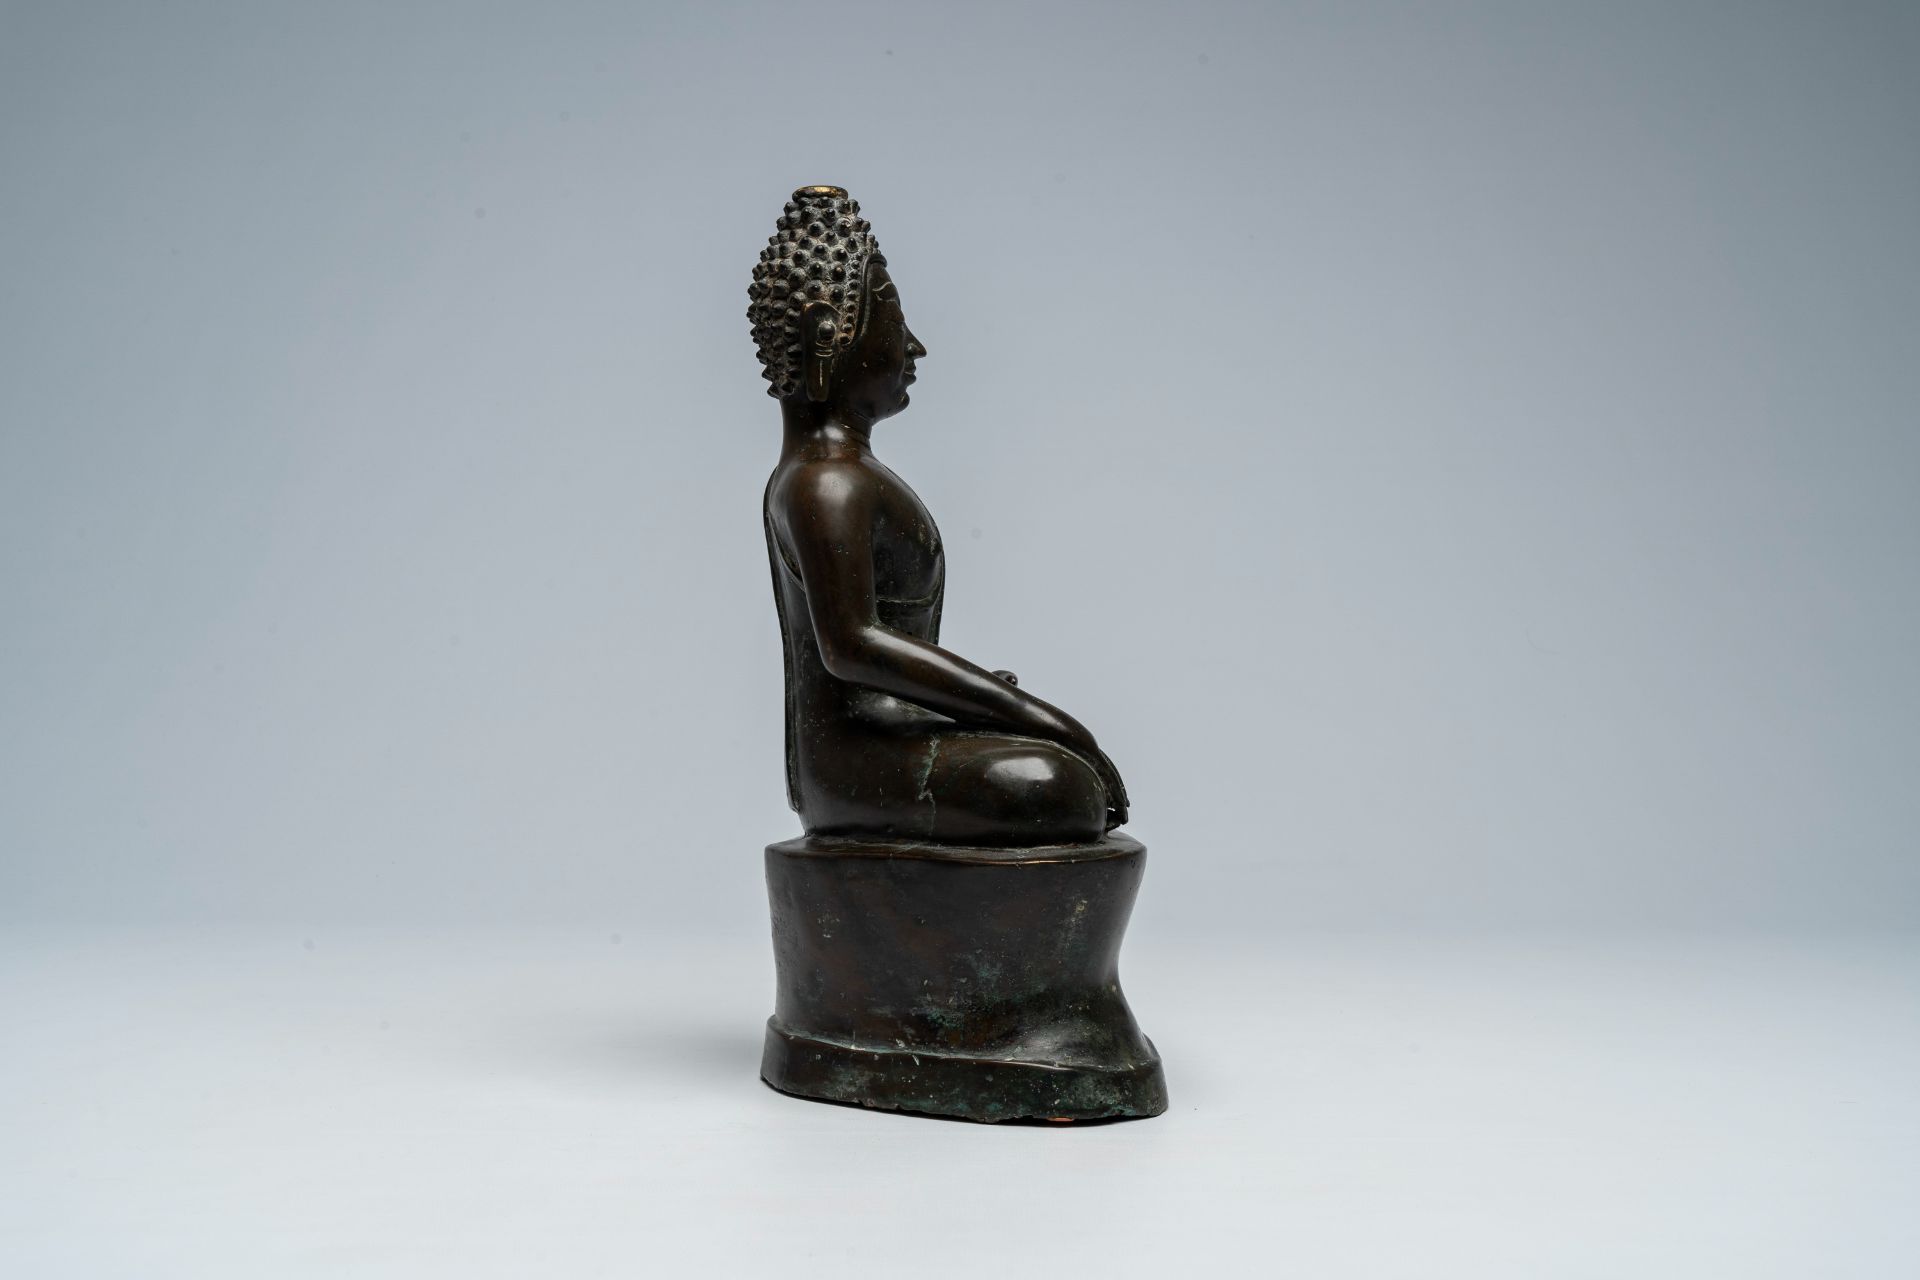 A Thai patinated bronze figure of a seated Buddha, possibly 16th C. - Image 5 of 7